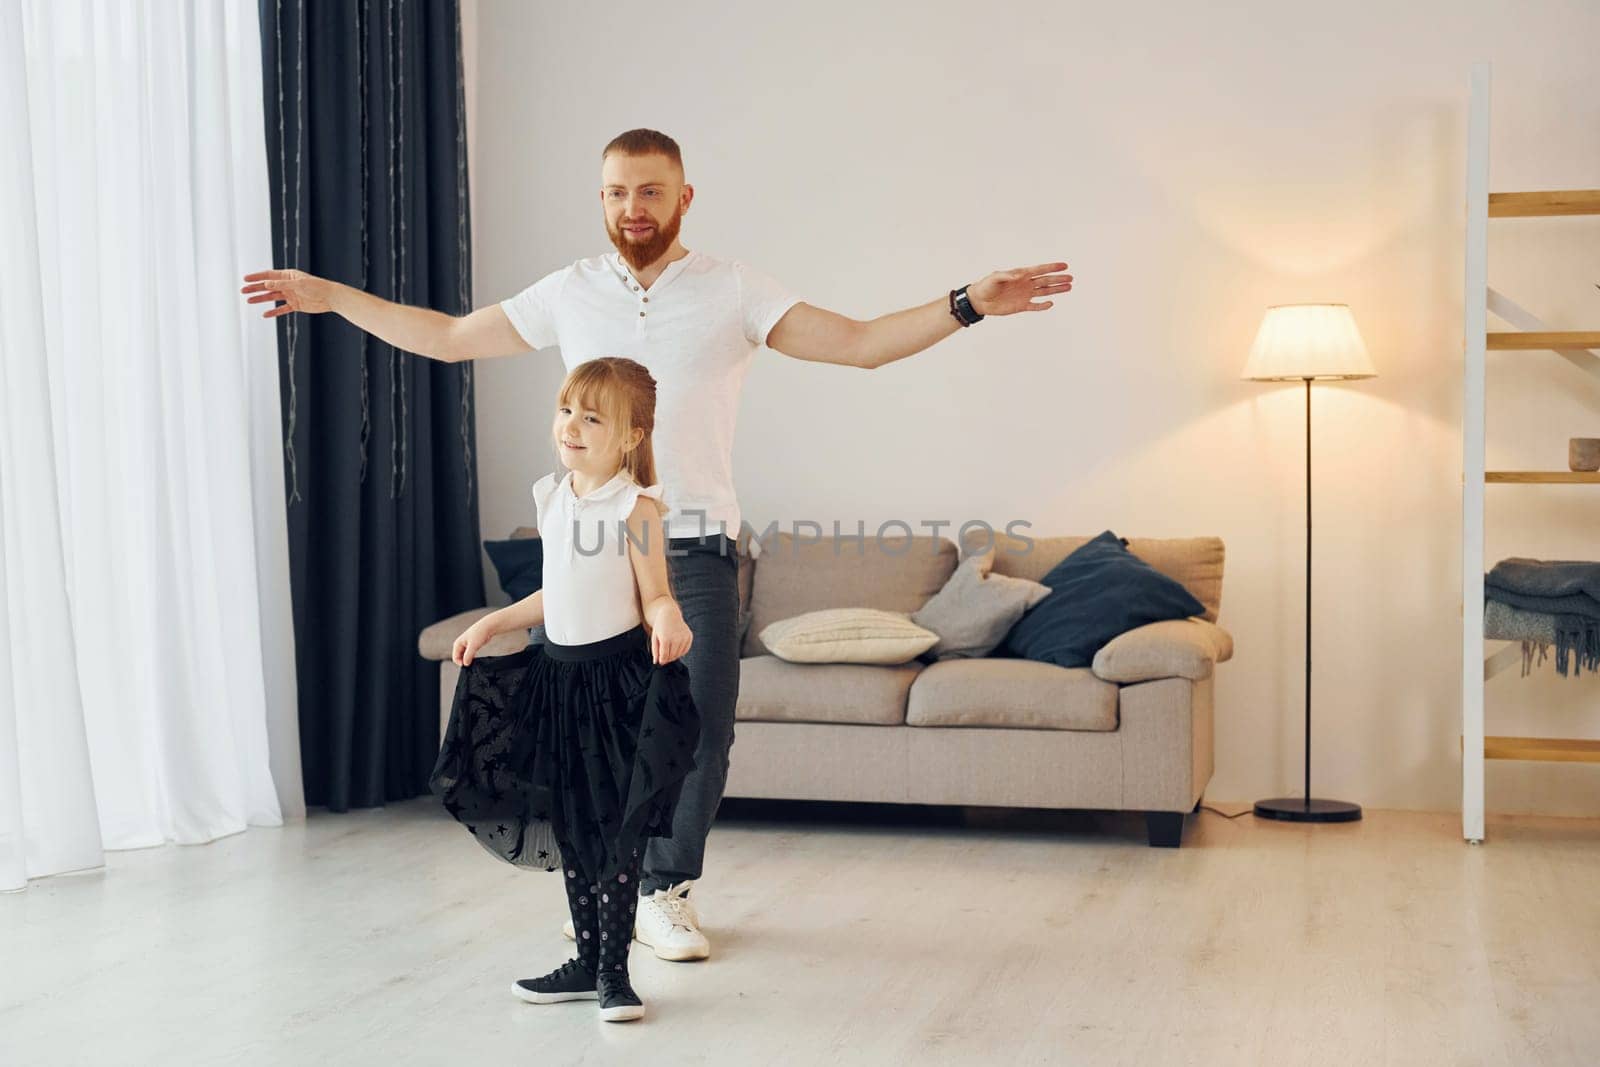 Yoga poses. Father with his little daughter is at home together by Standret